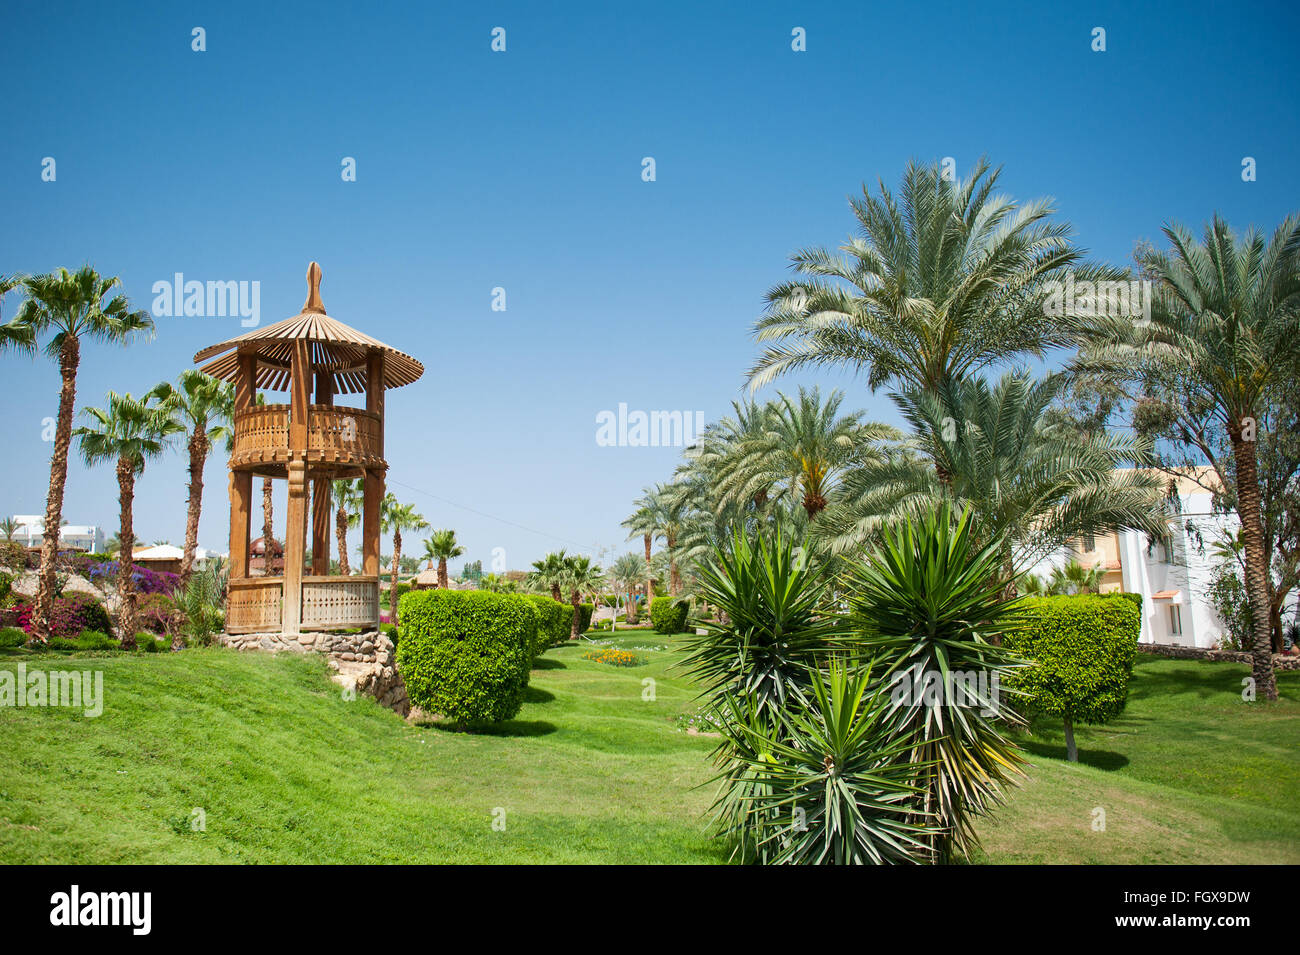 beautiful green area of the hotel with palm trees Stock Photo